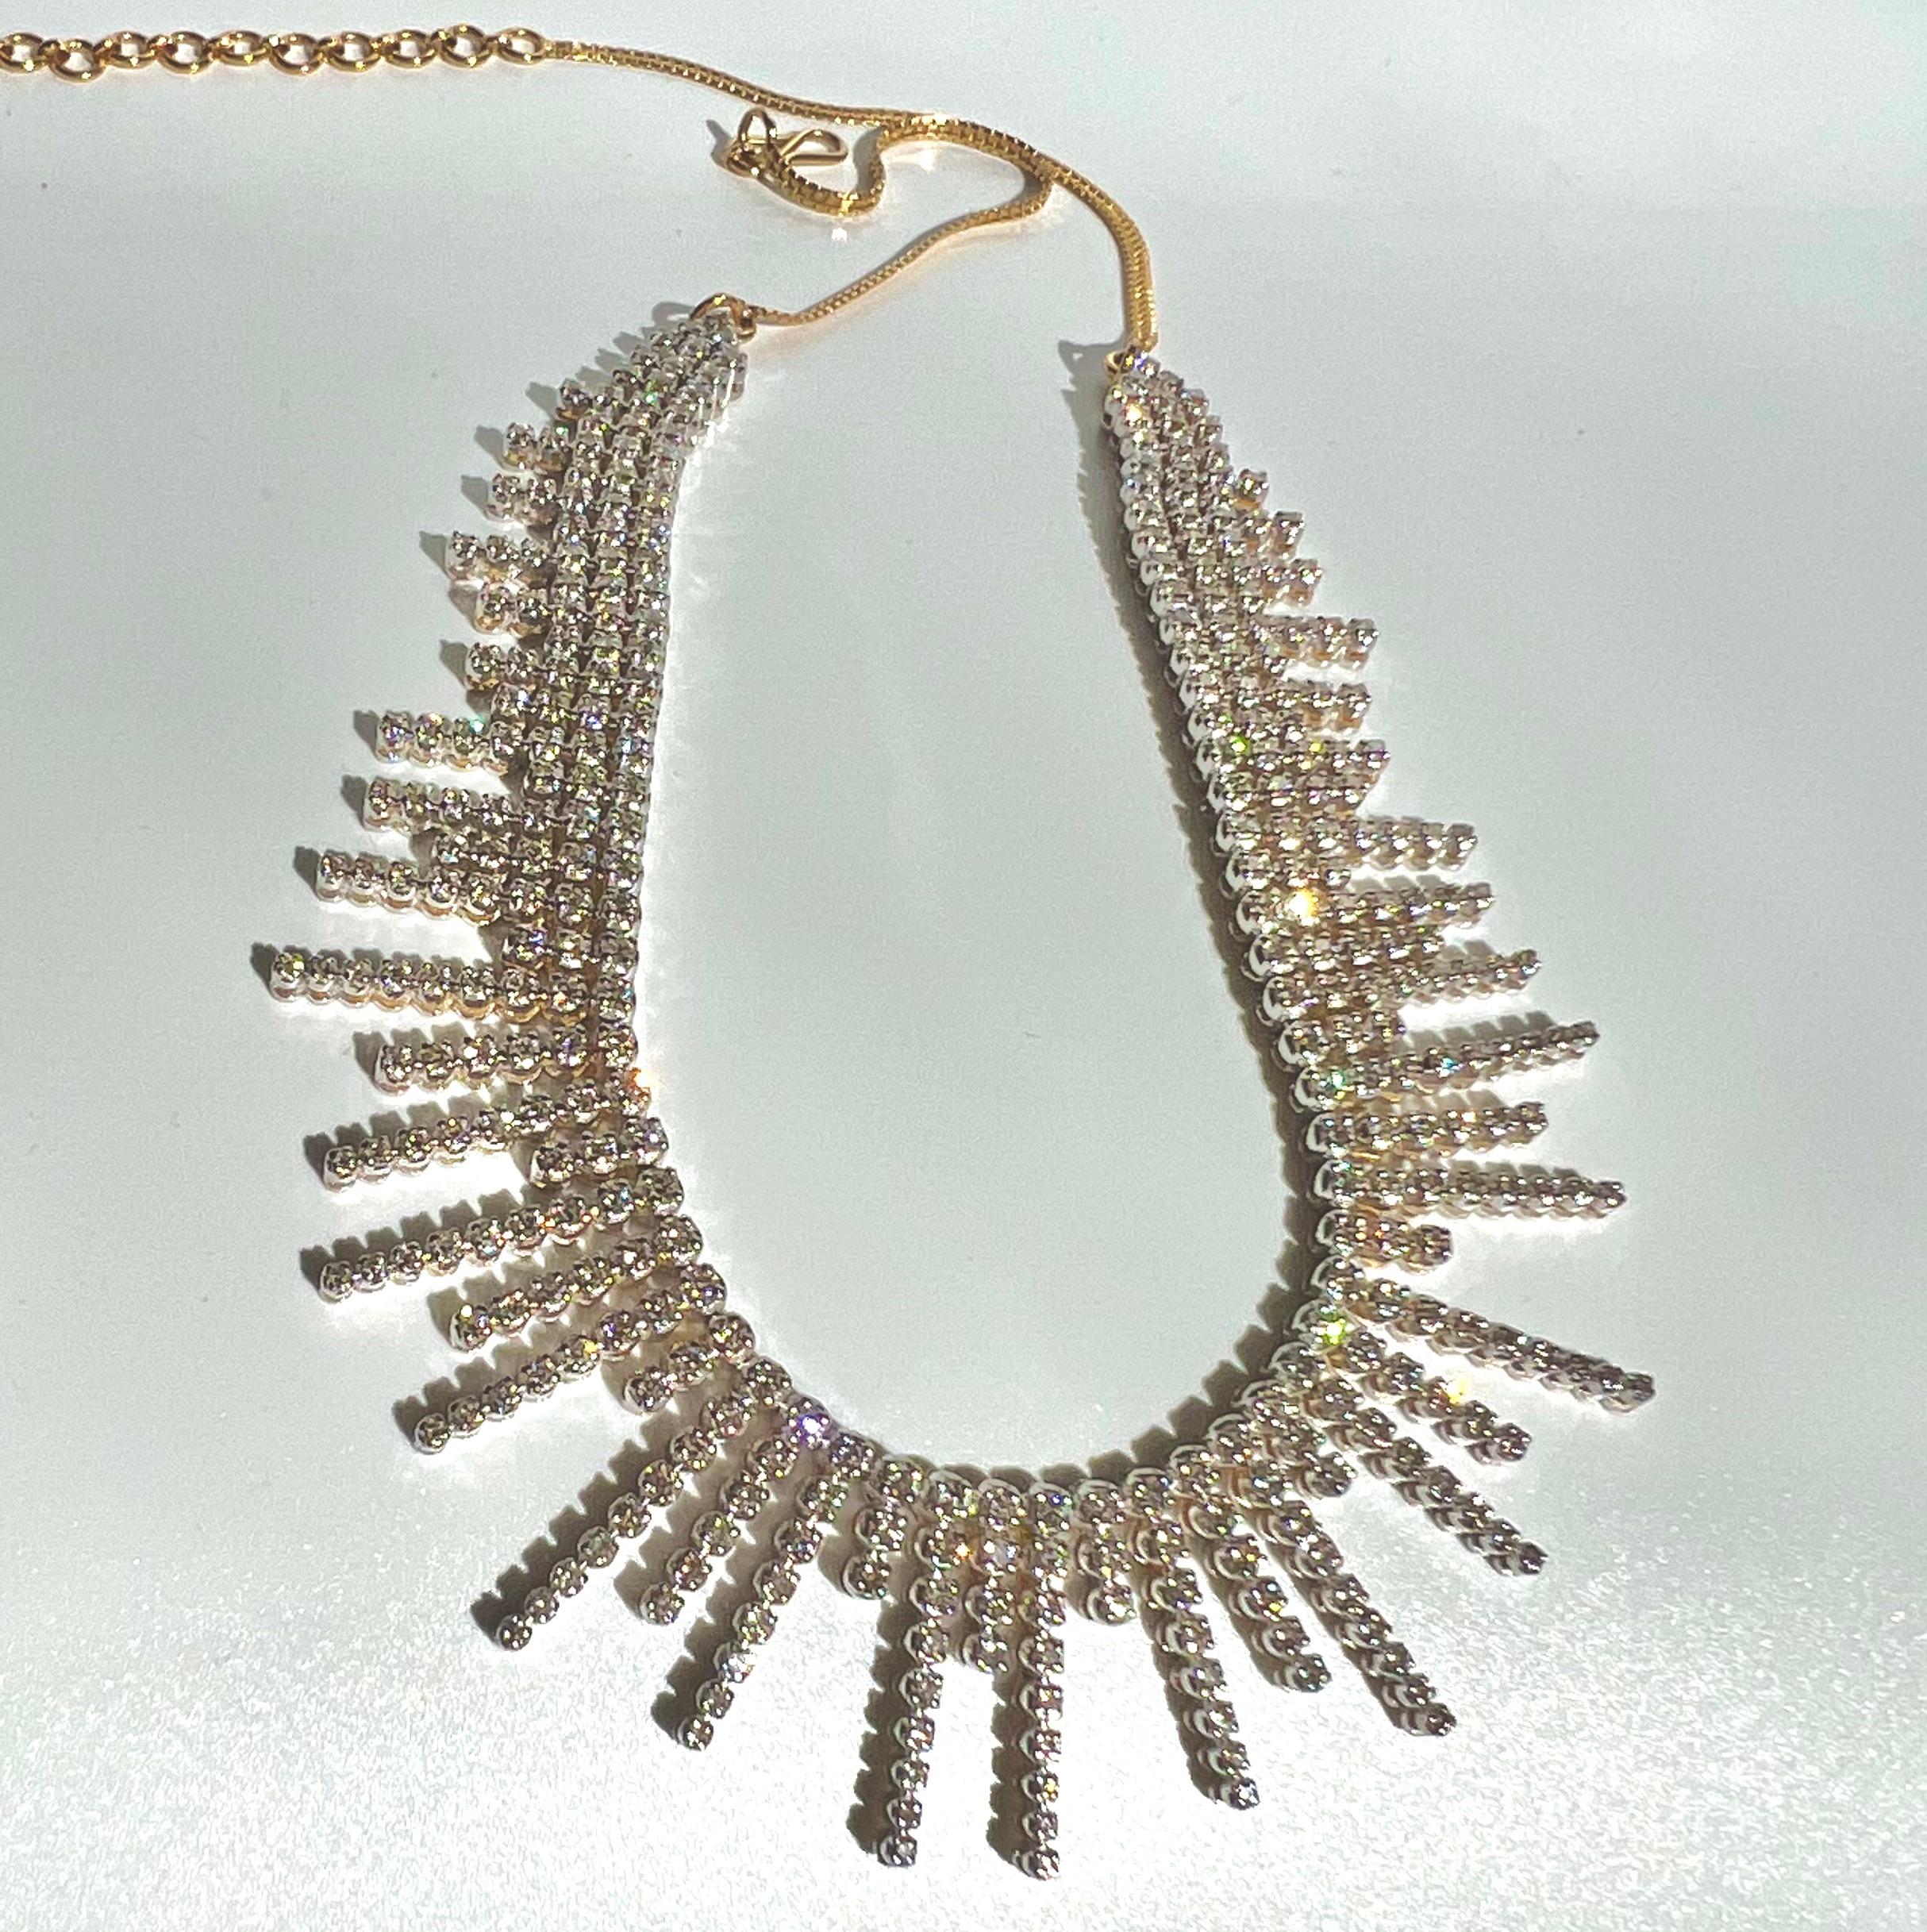 This Mystique Versatile Diamond Necklace is timeless and one of a kind with its luxurious design handcrafted in 18k yellow gold with brilliant diamonds set in prong setting.

6.03 TCW diamonds
18